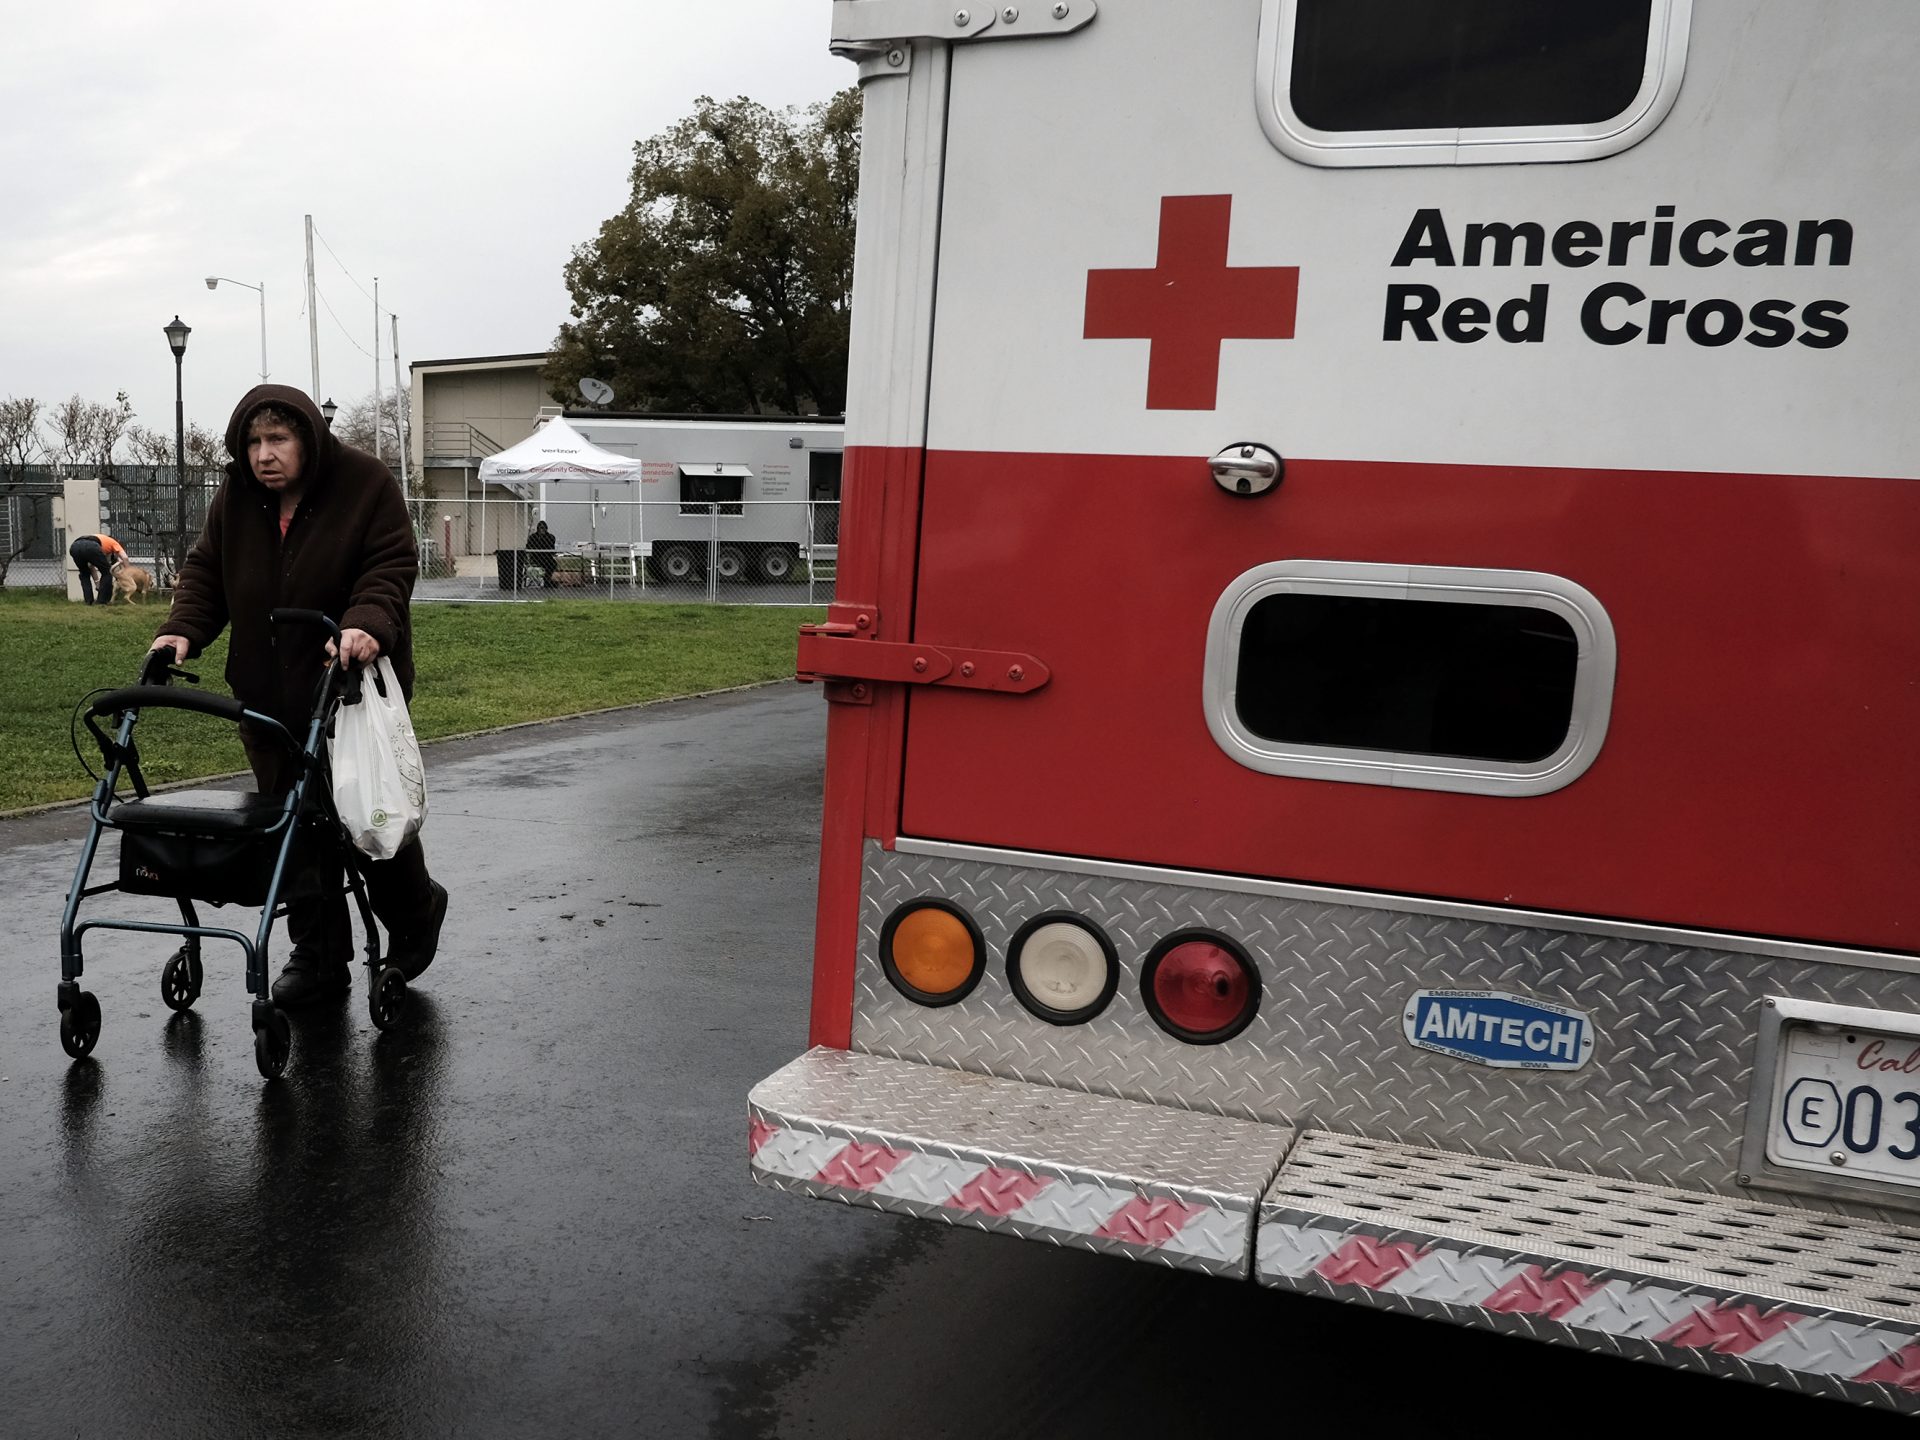 An evacuee walks past an American Red Cross vehicle at an evacuation center in Chico, Calif., on Feb. 15, 2017. Flooding had damaged the nearby Oroville Dam and there was danger it might break. Around 188,000 people were evacuated, but the dam held.